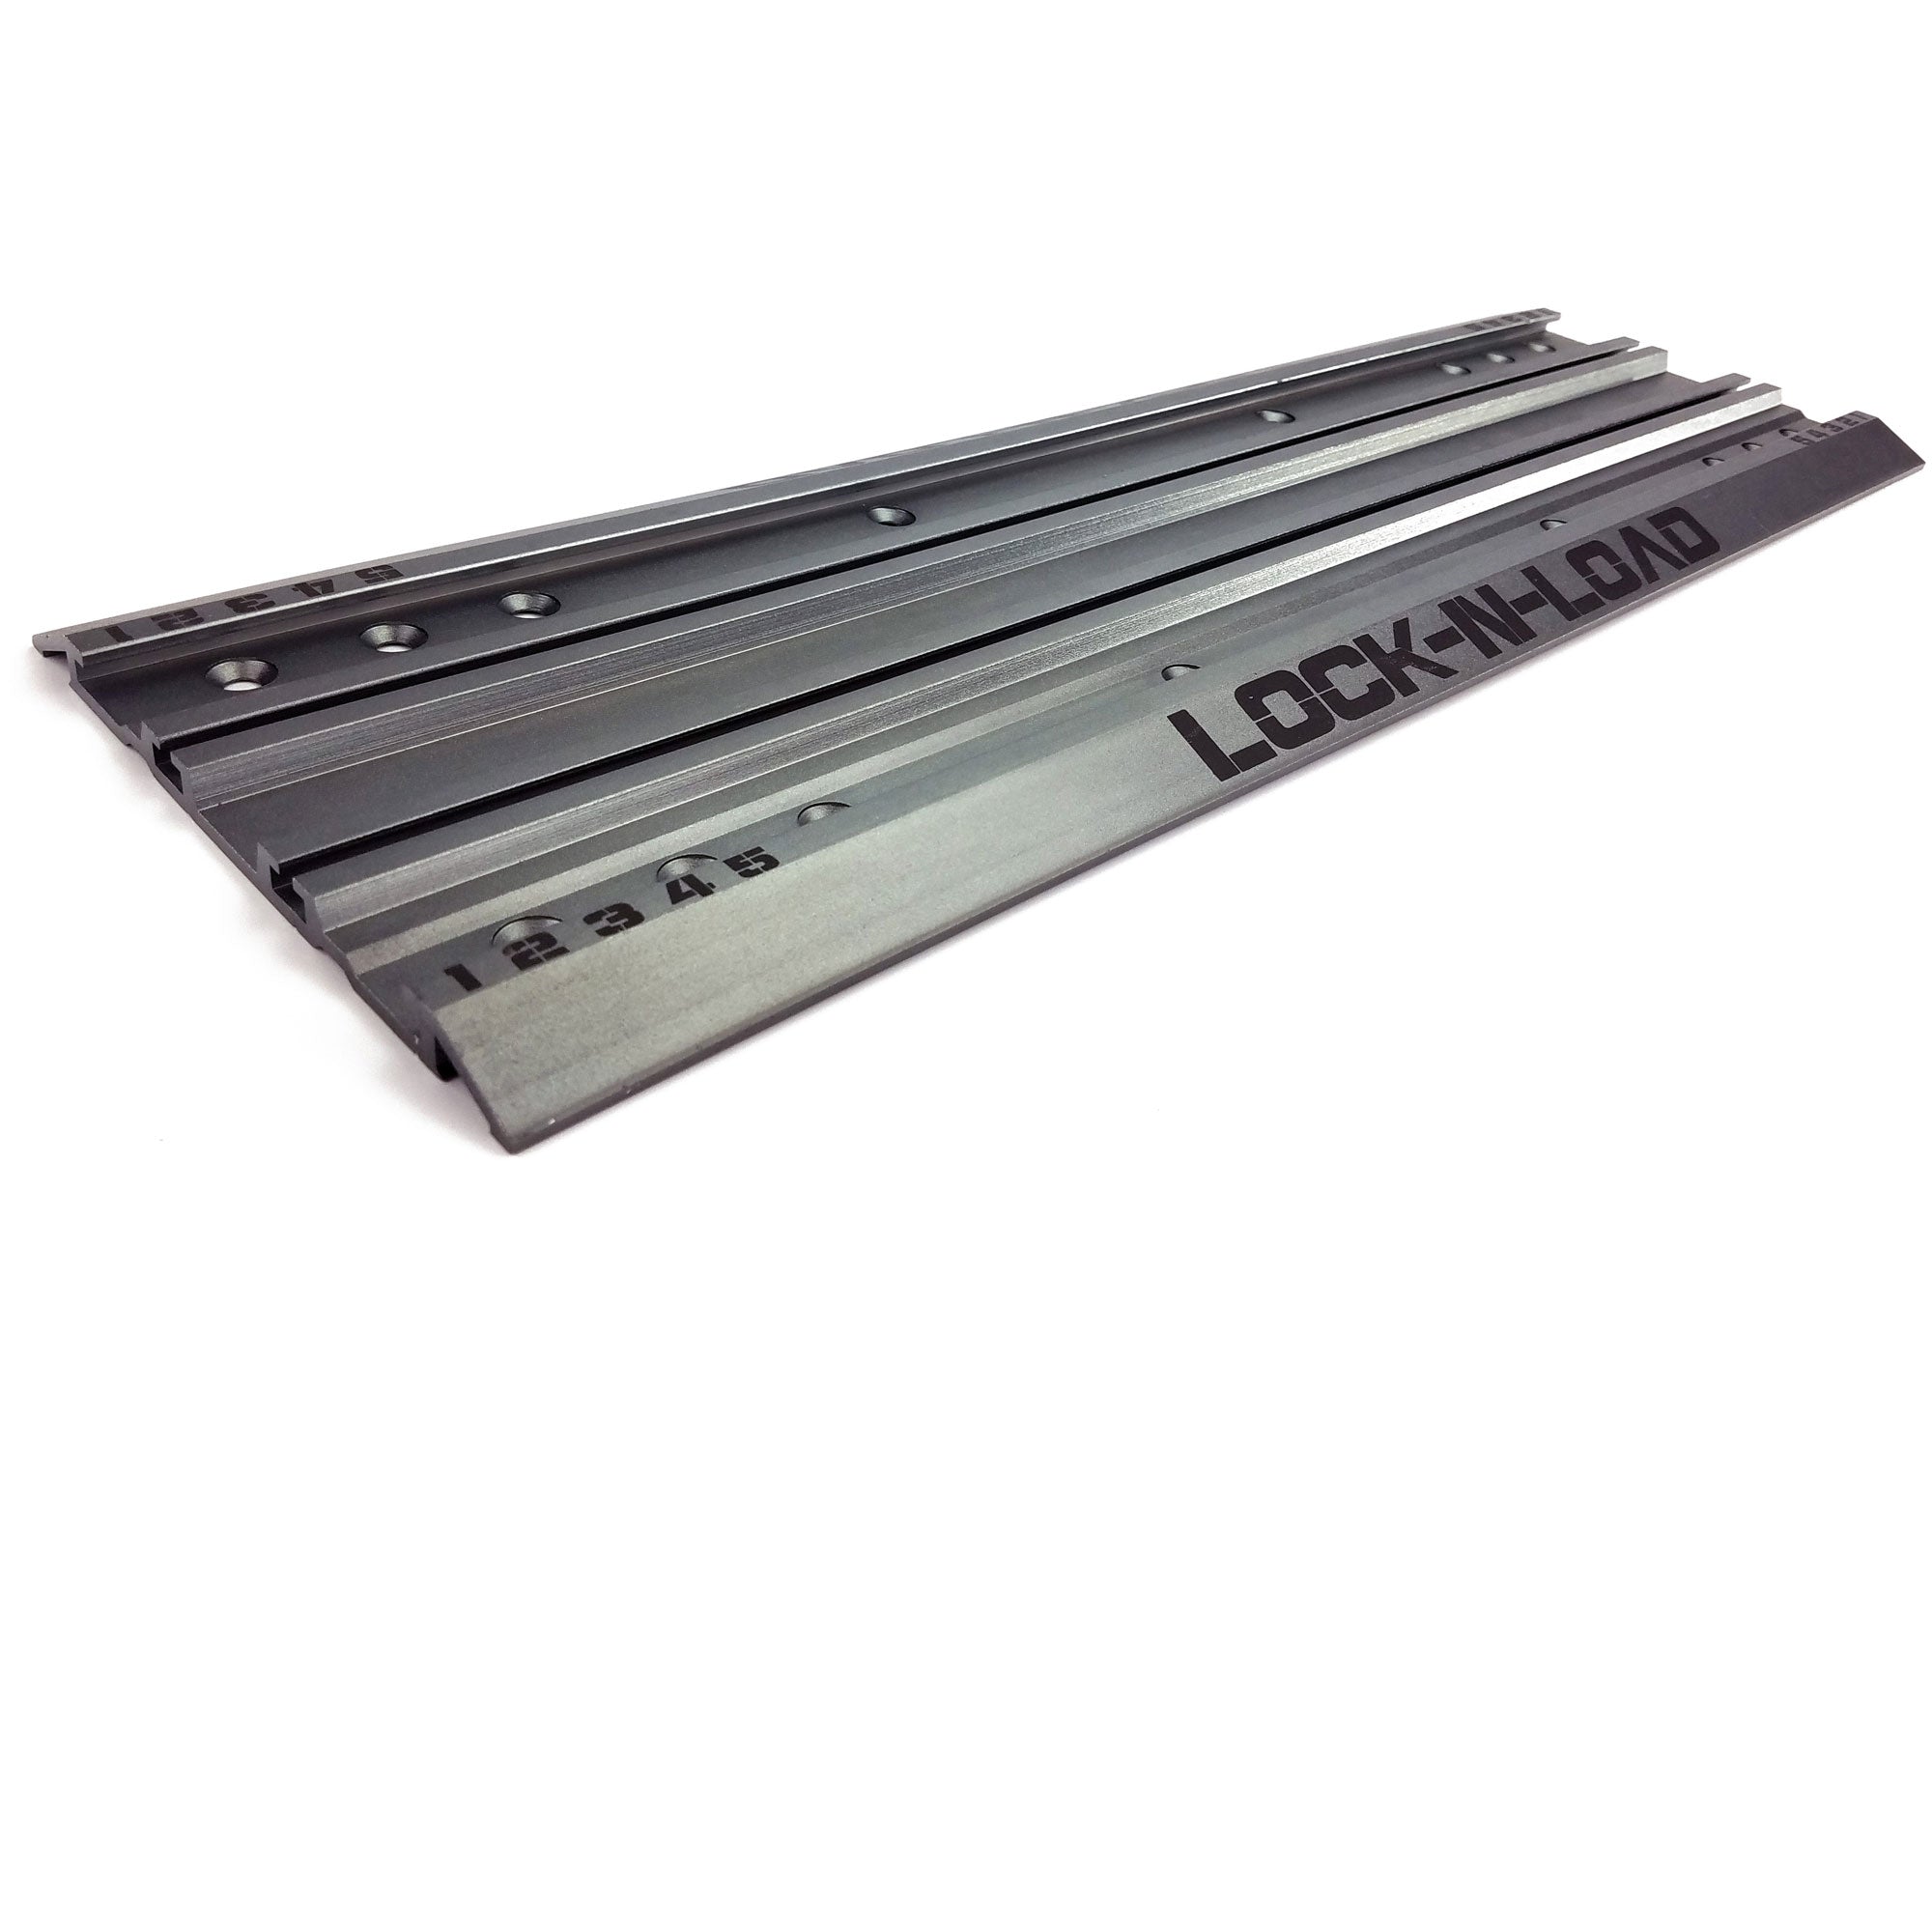 Lock-N-Load Pro Mounting Plate